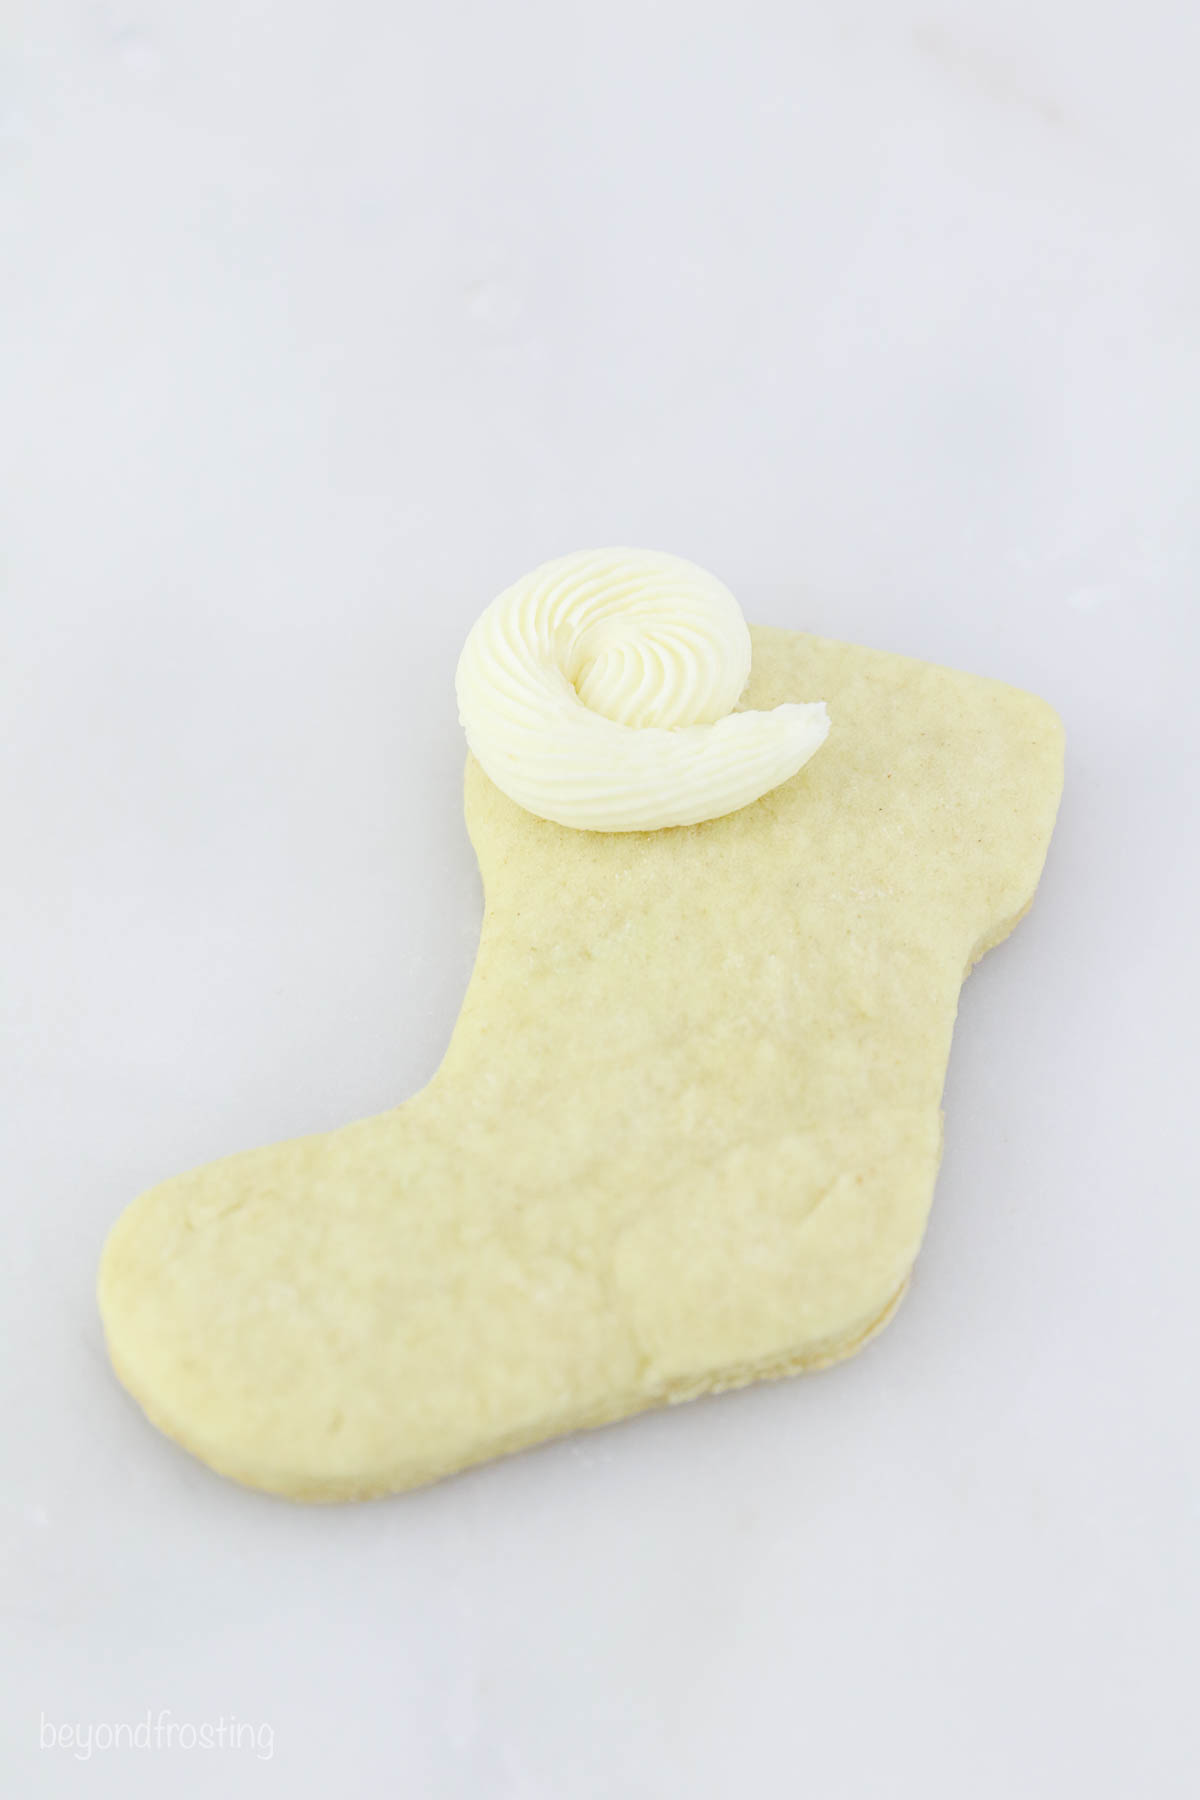 A stocking sugar cookie with a white rosette